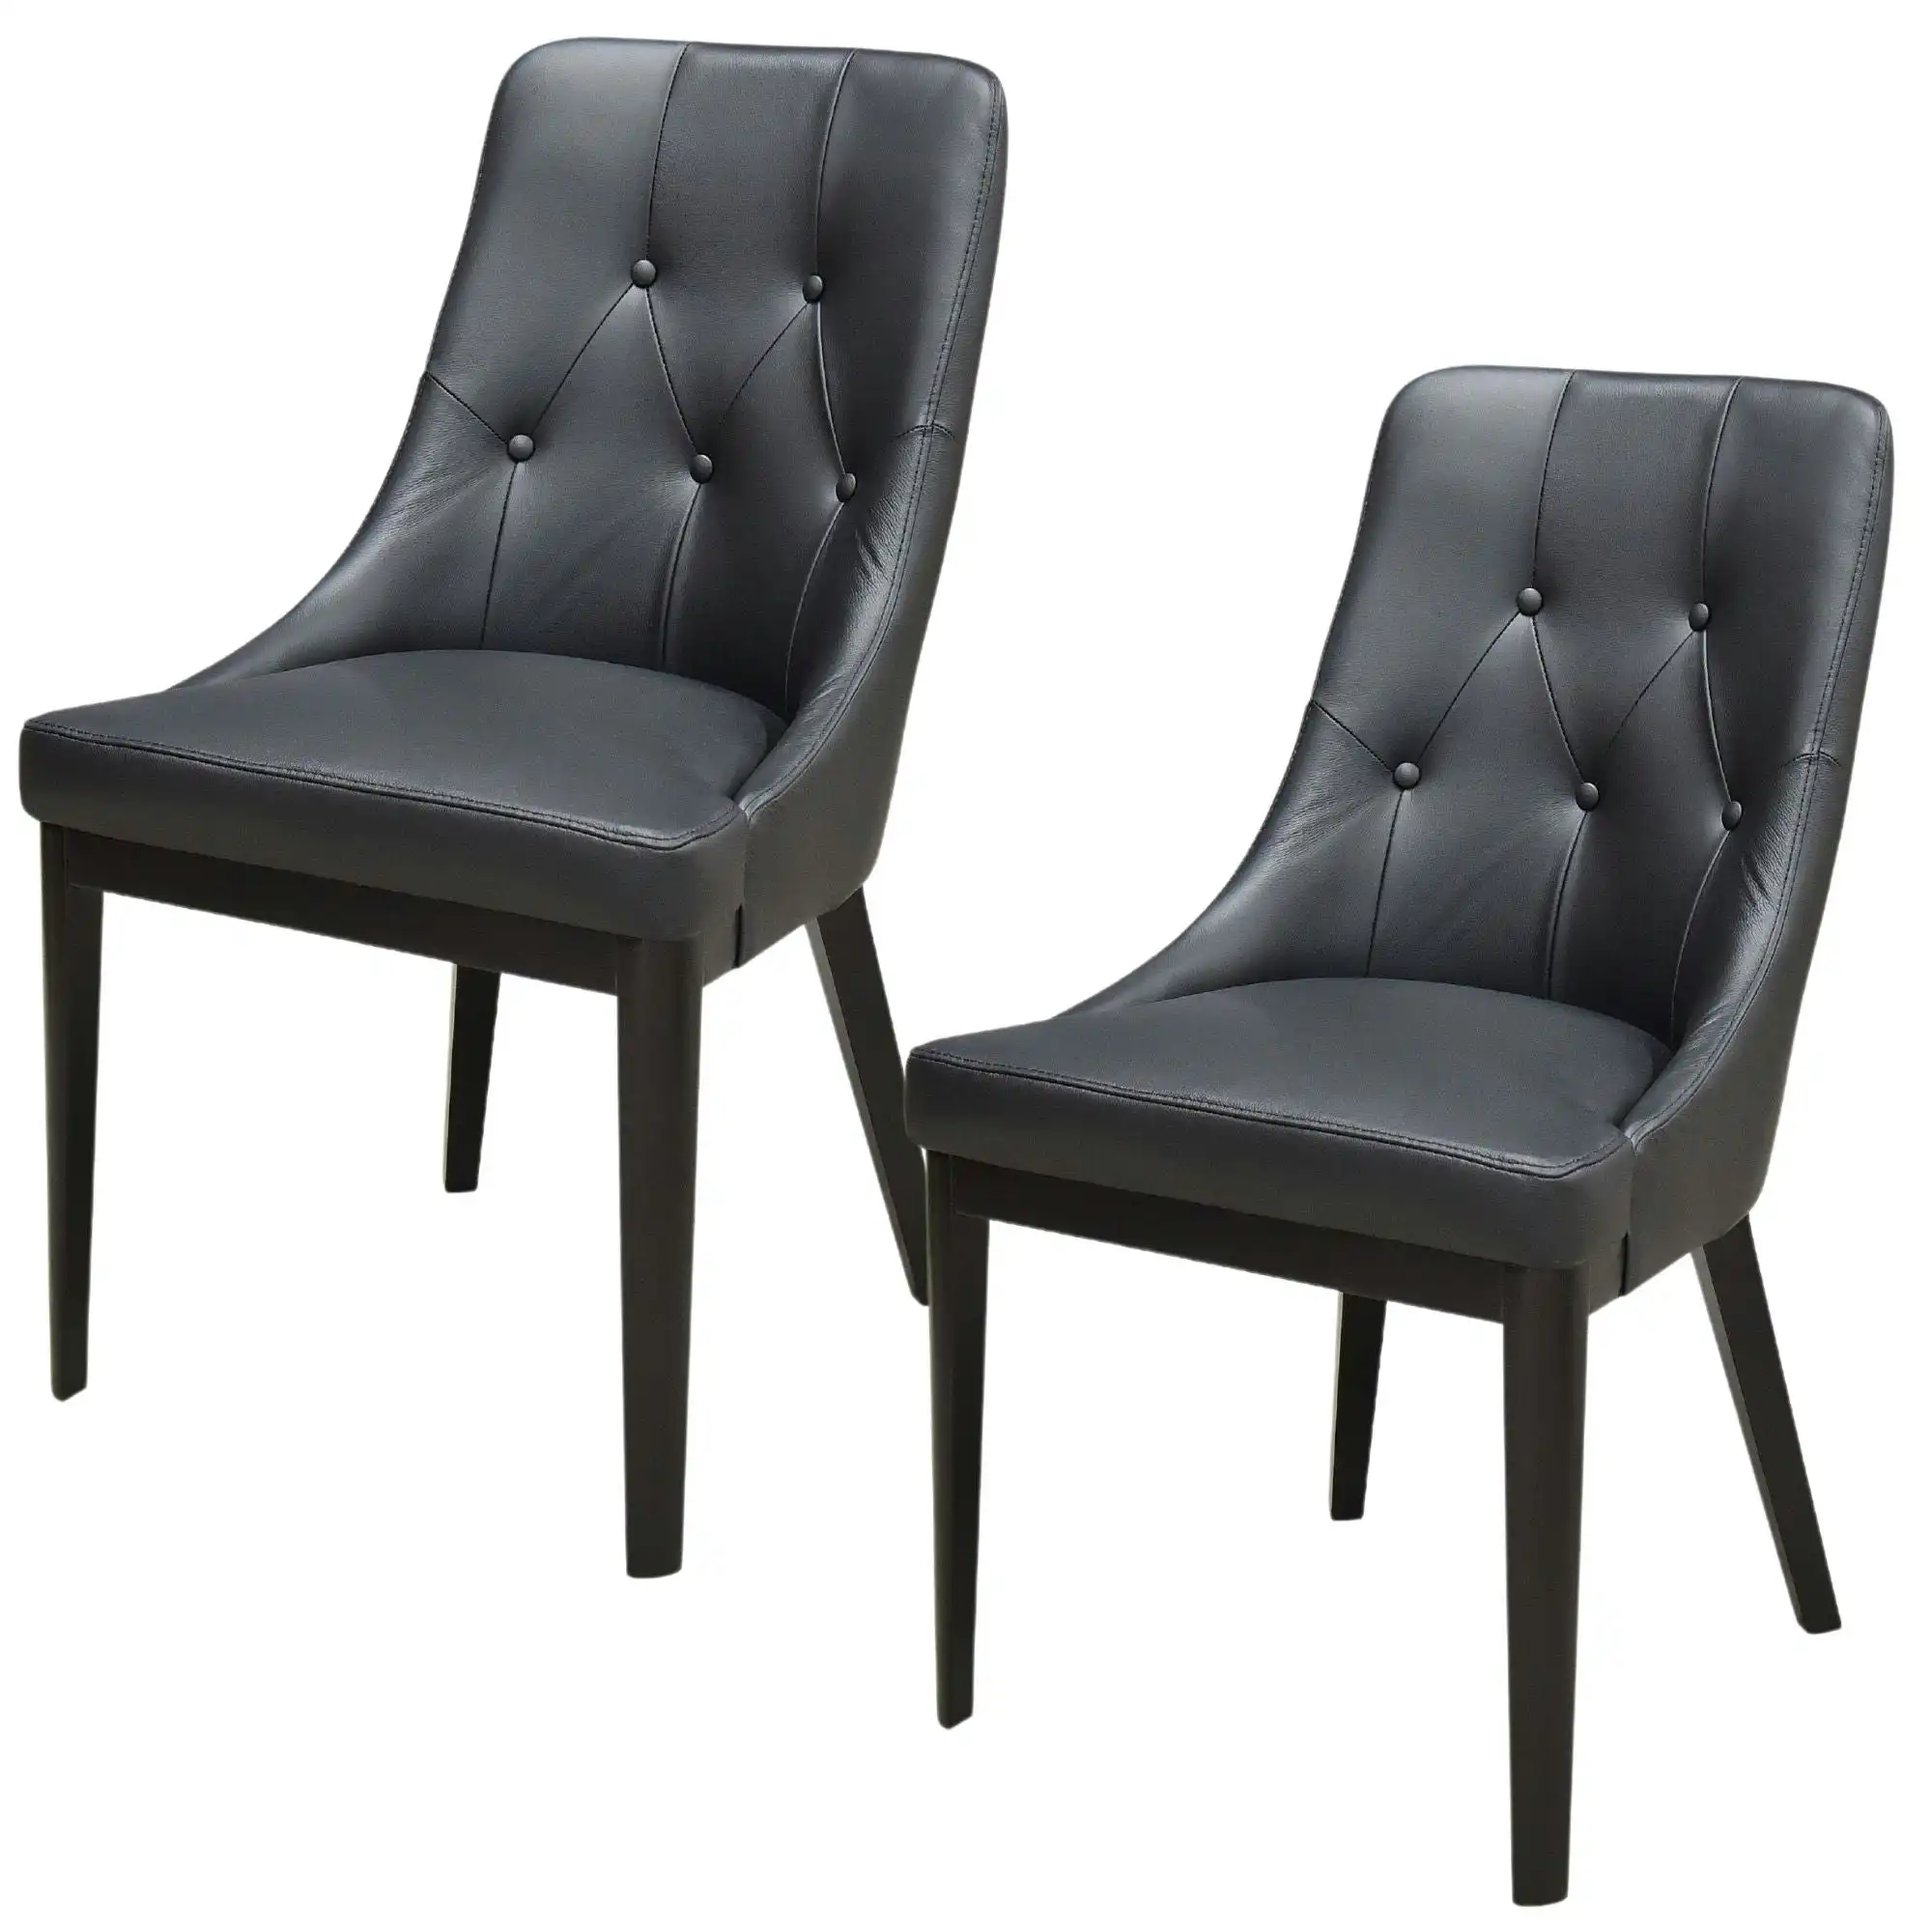 Jenny Set of 2 Leather Dining Chair Black